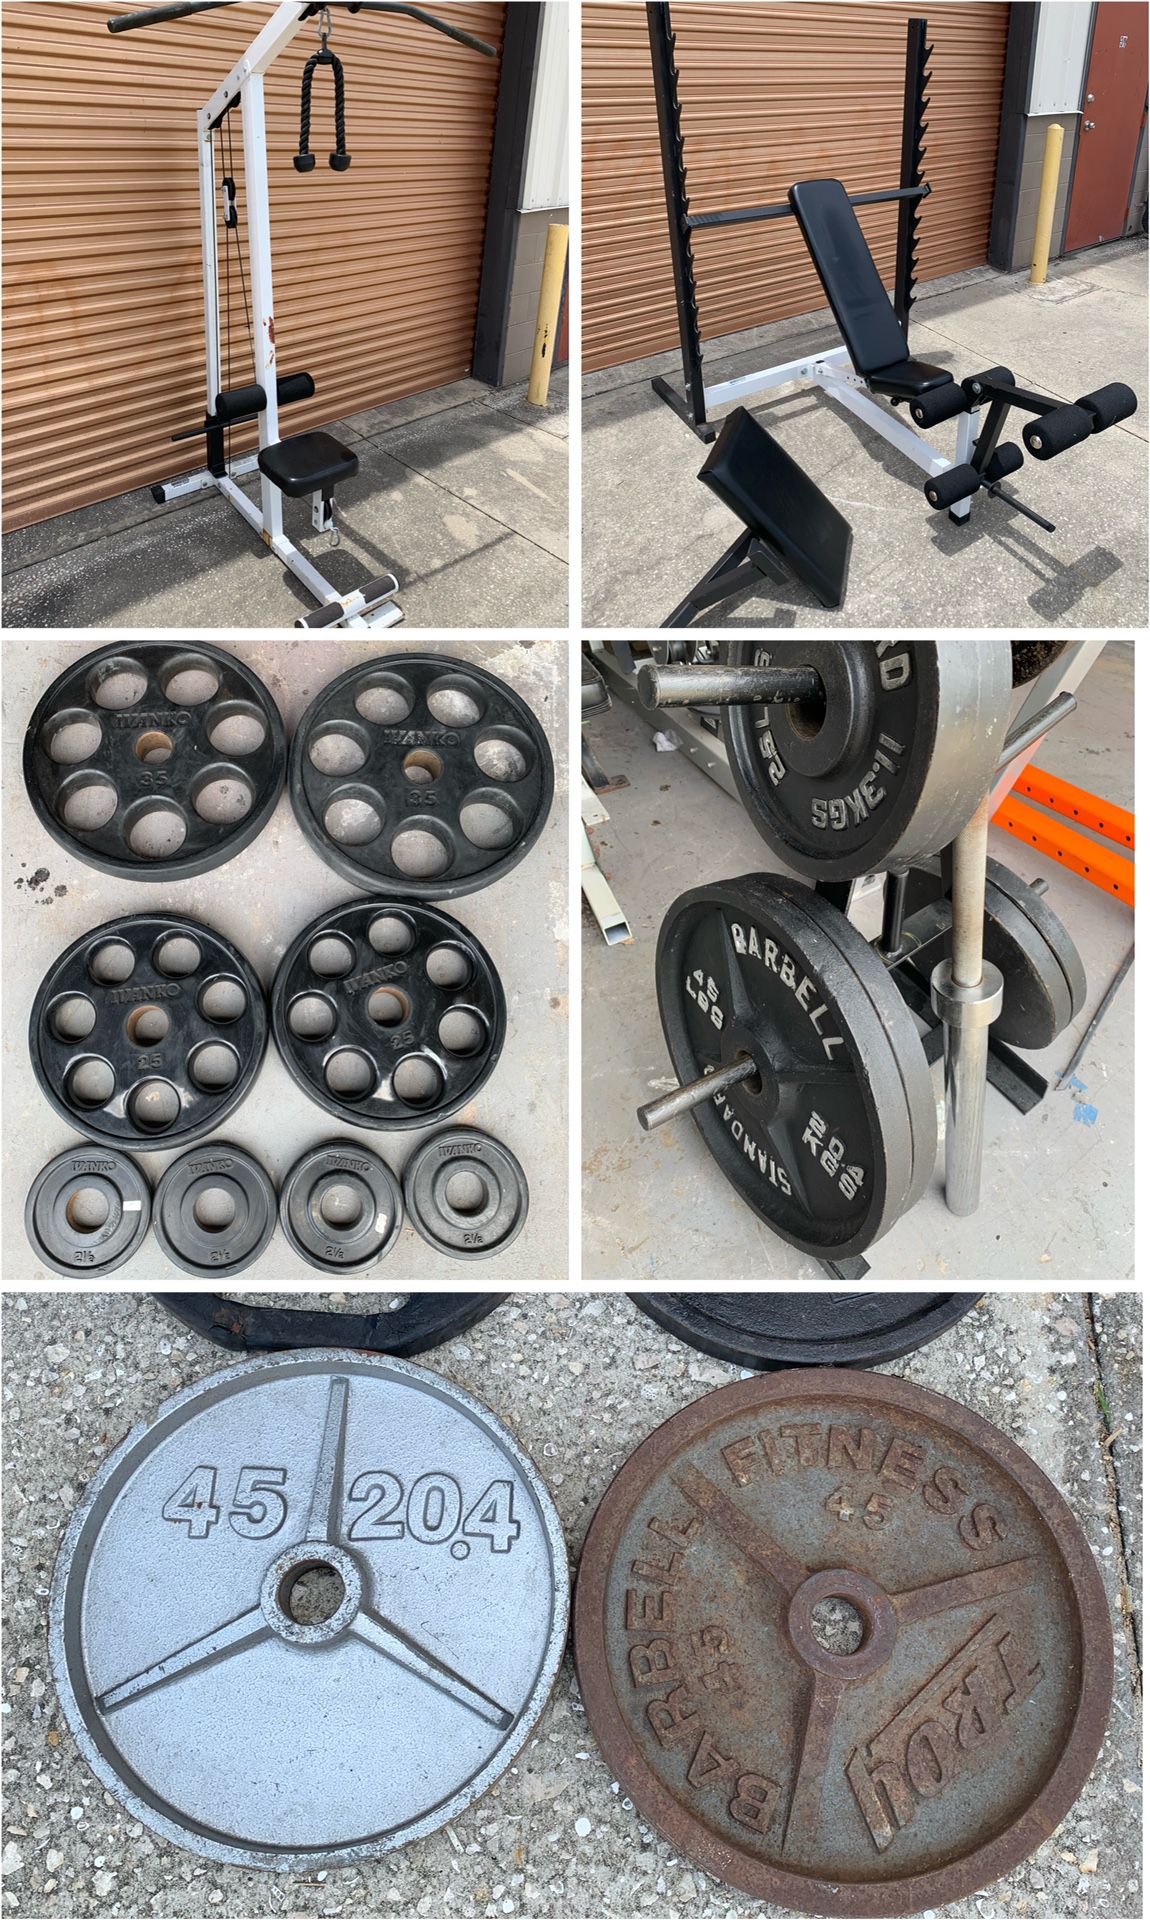 Olympic Weight Plate, Bench, Dumbbells, Lat Pull Down, Leg Curl/ Leg Extension, Curl Bar